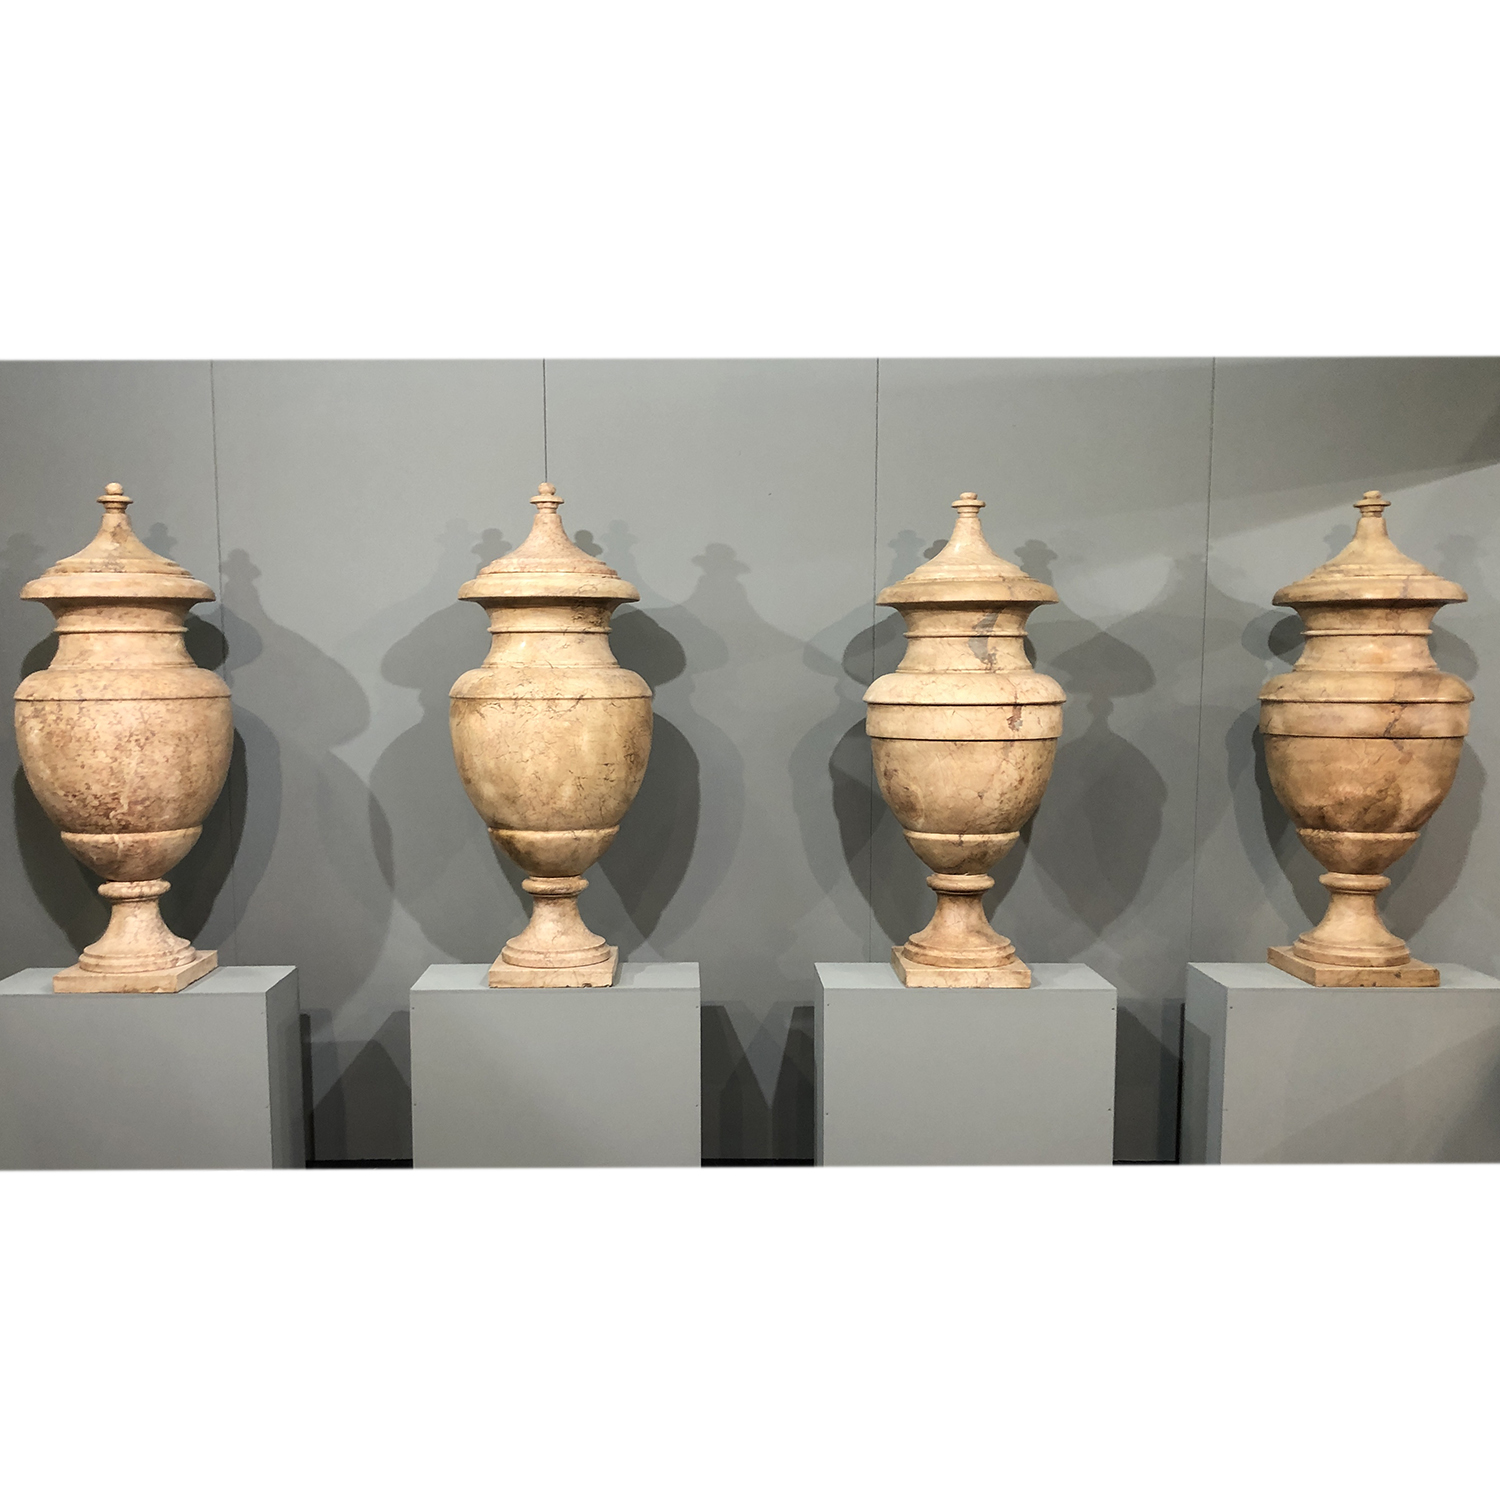 Set of Late 19th Century Marble Urns